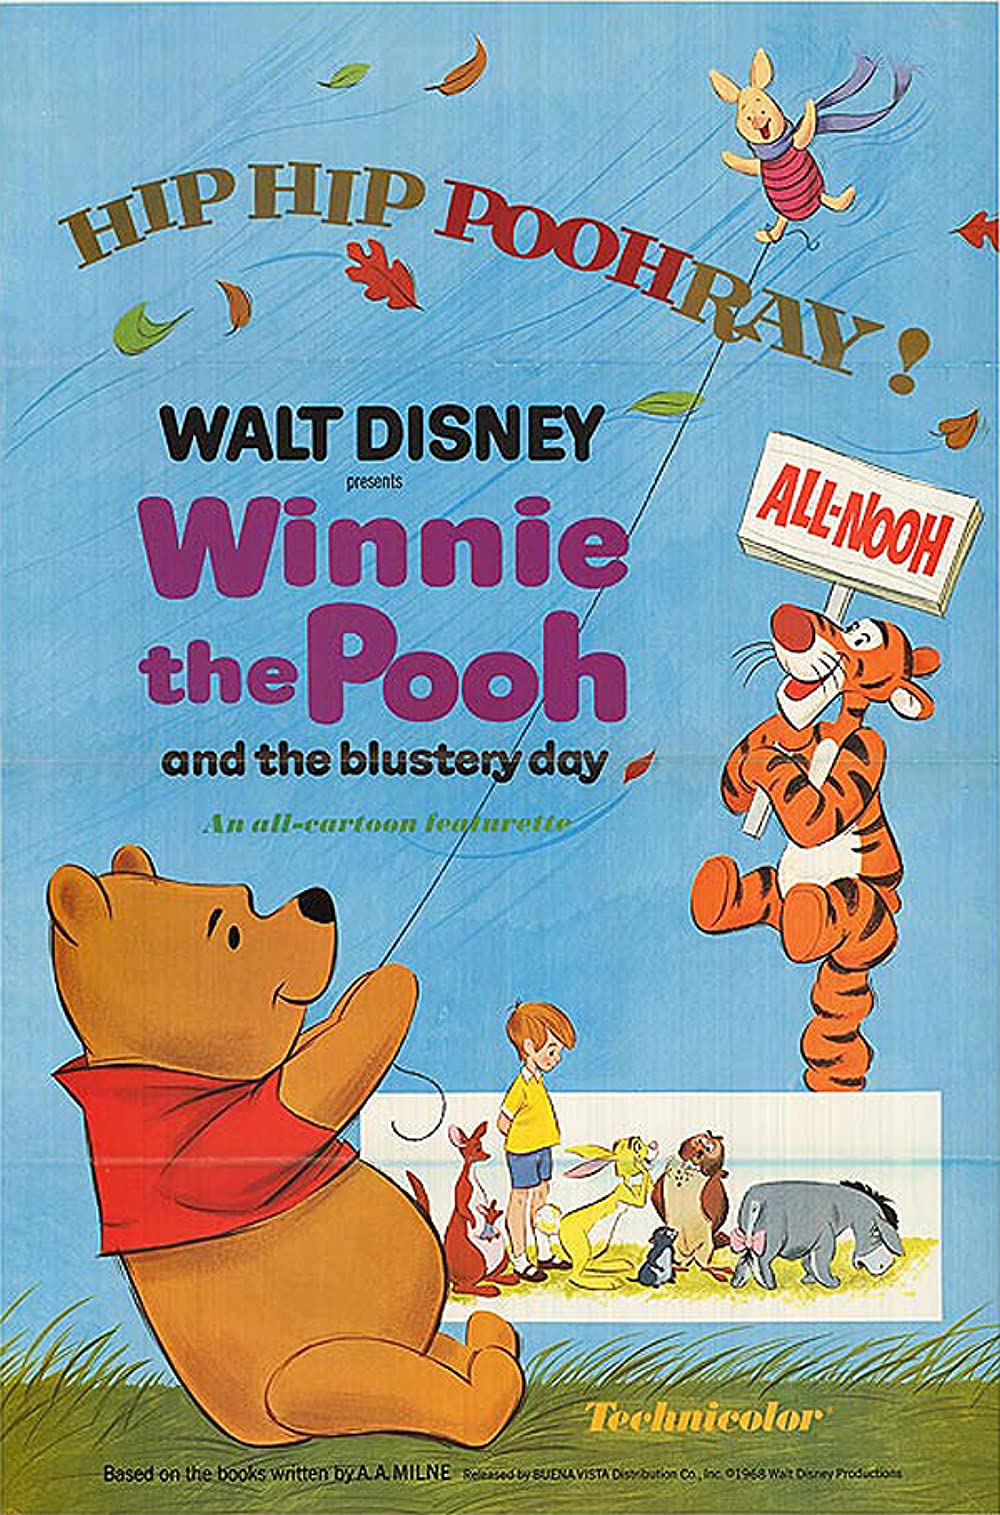 Winnie the Pooh and the Blustery Day (Short 1968)